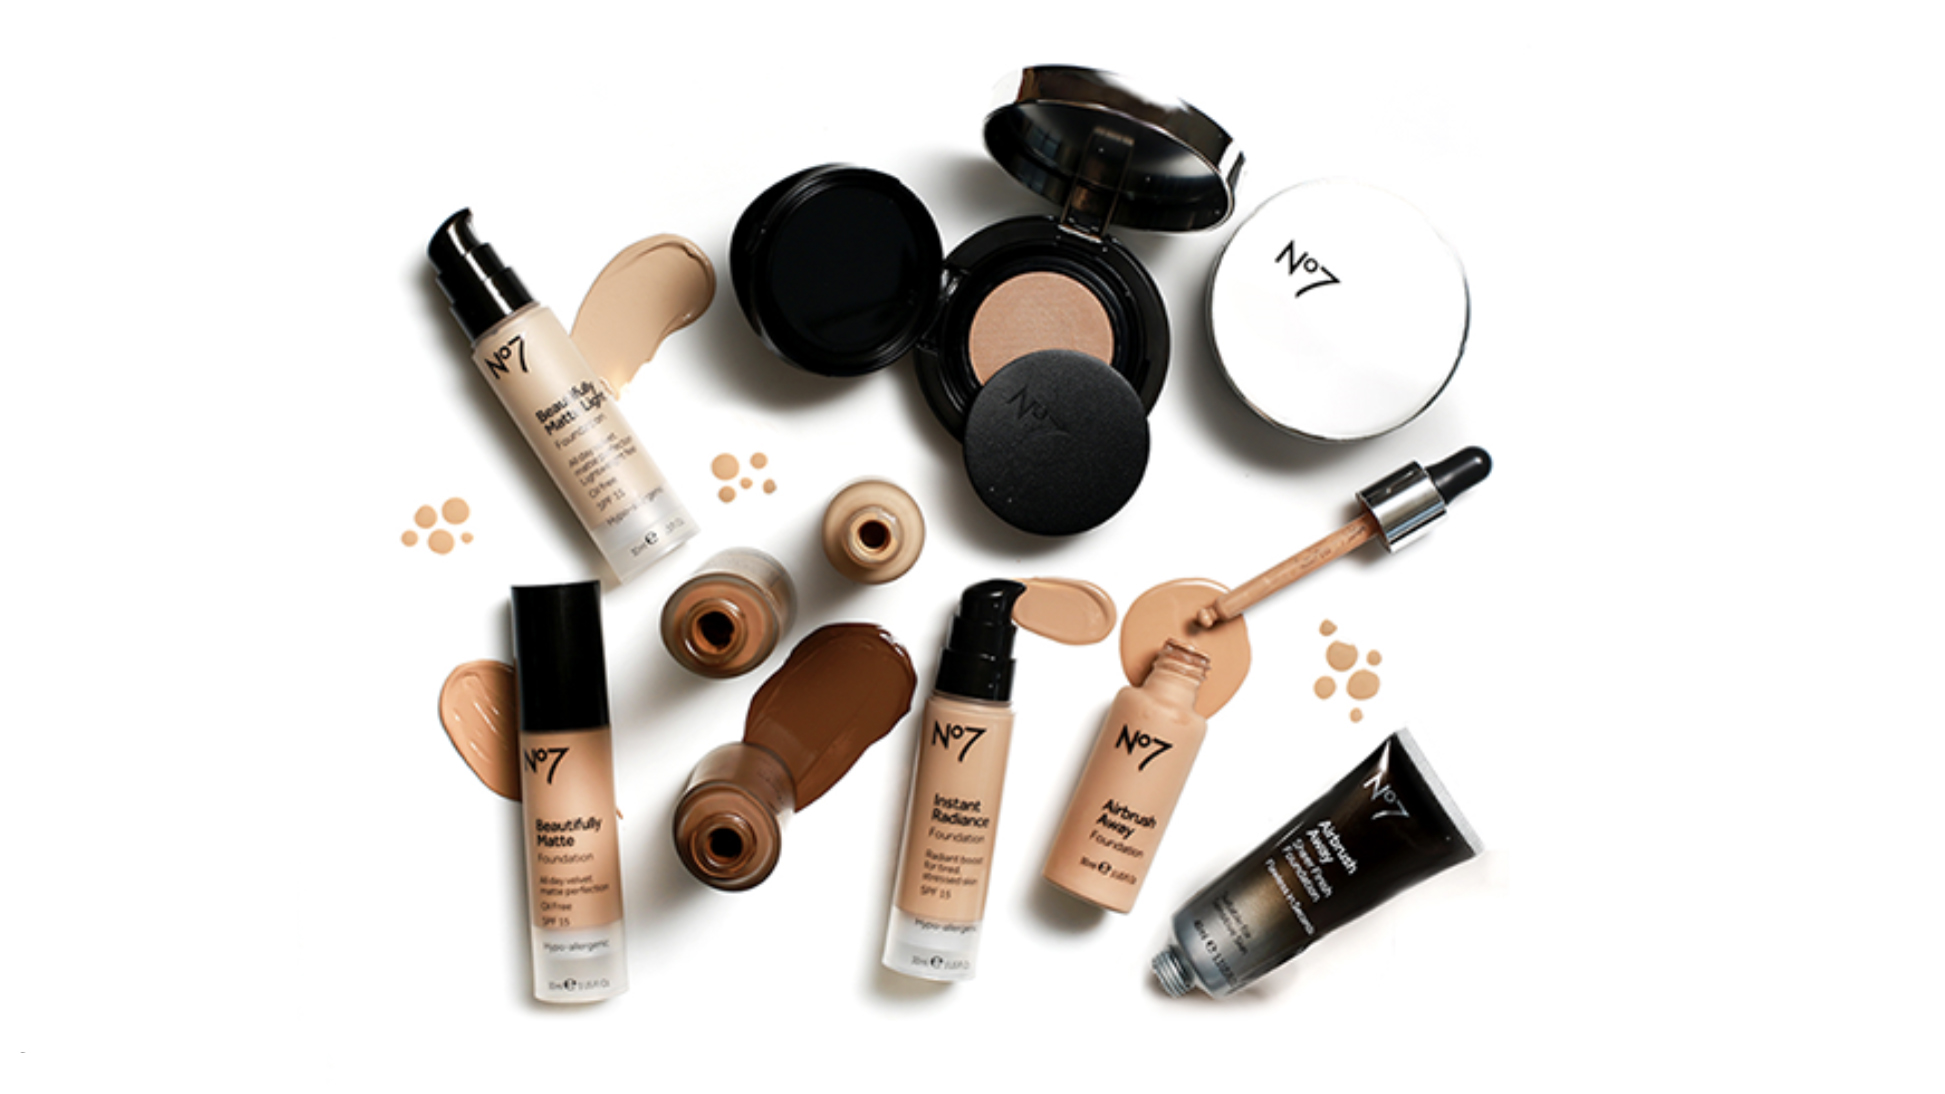 Six Best Foundations For Oily Skin: From Lancome, Chanel, Vichy, Clarins,  Boots No 7